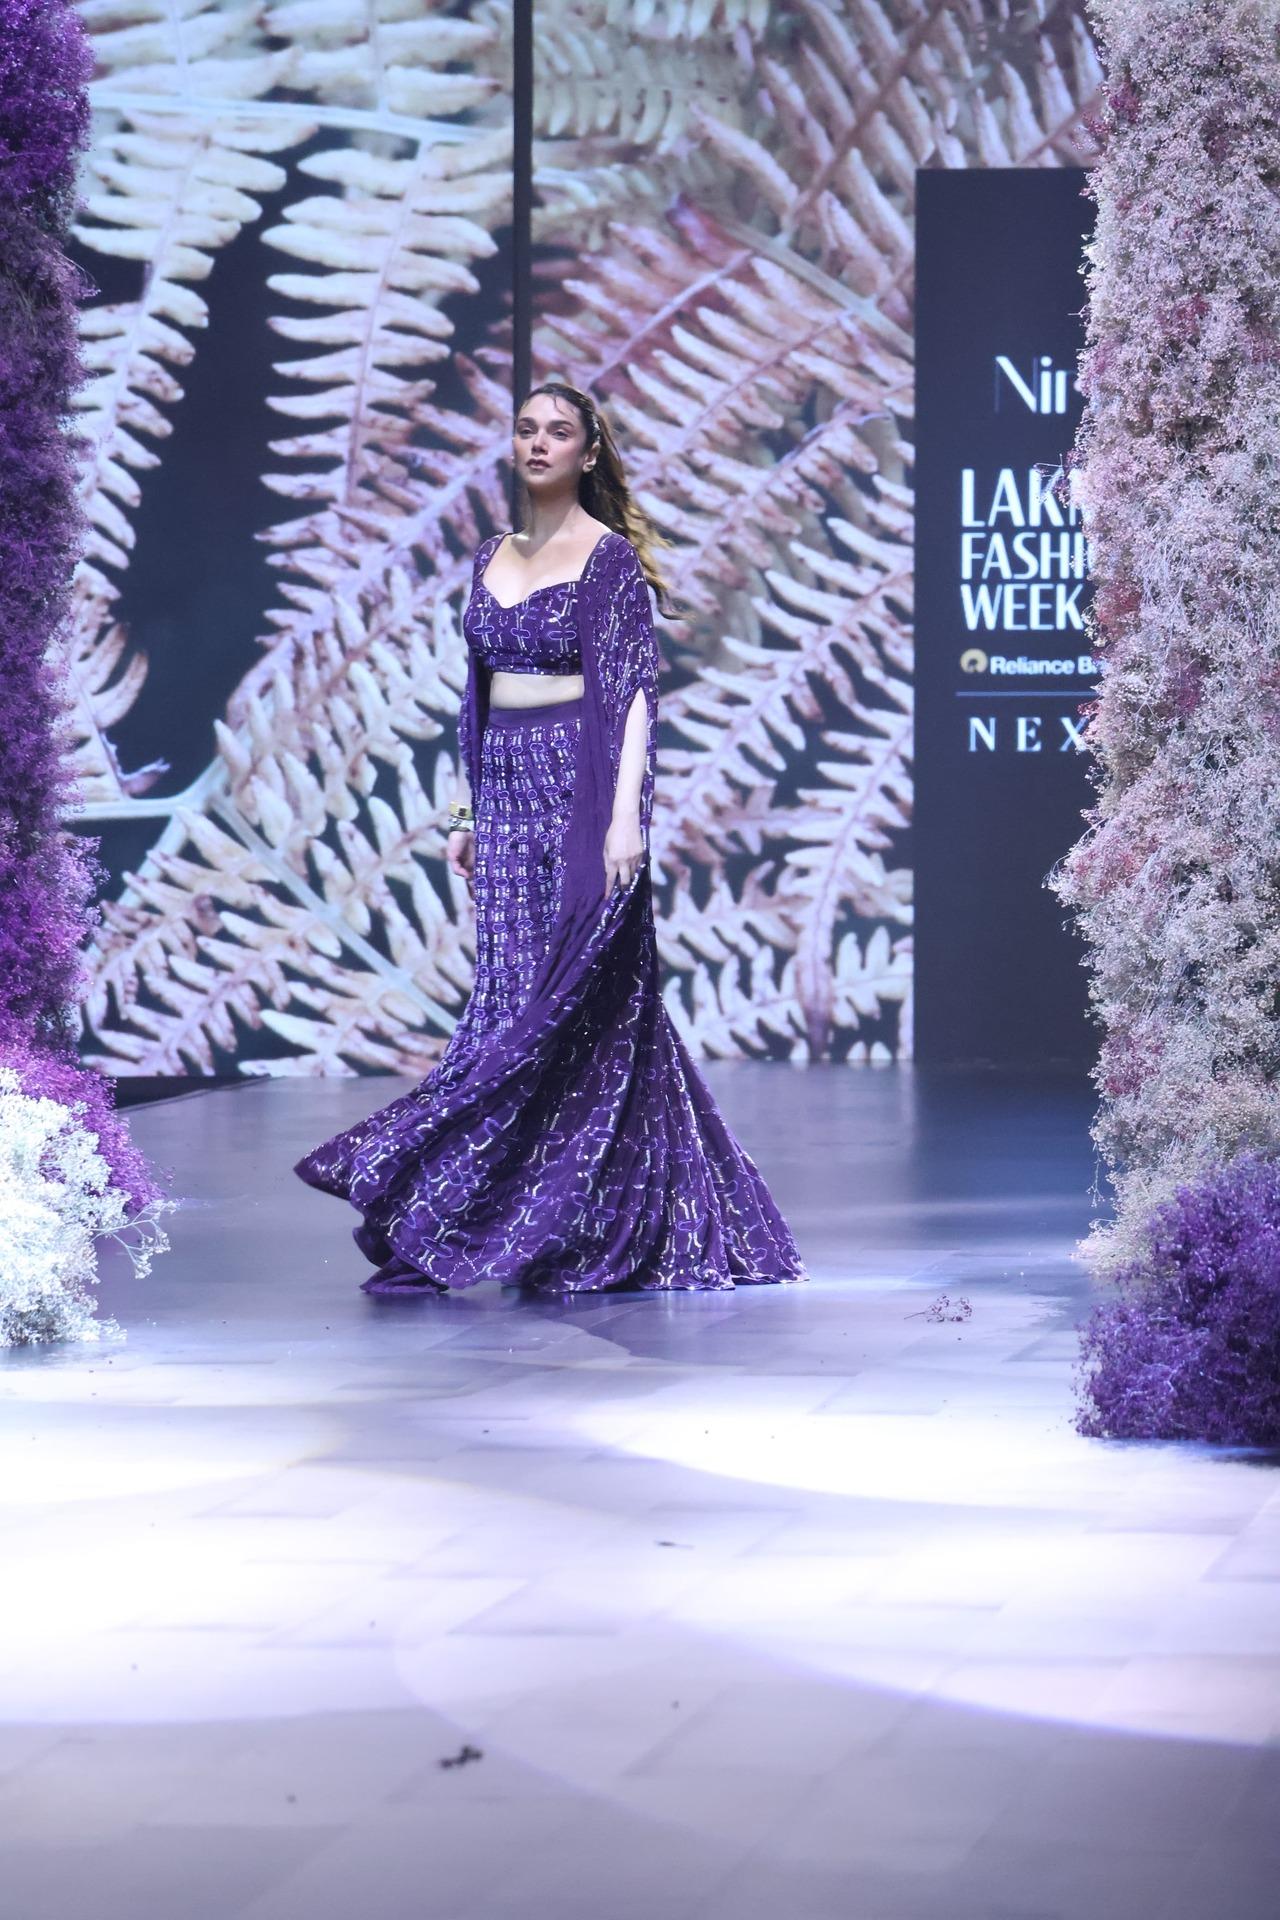 Aditi looked ethereal in a purple co-ord fit that came with an elegant cape